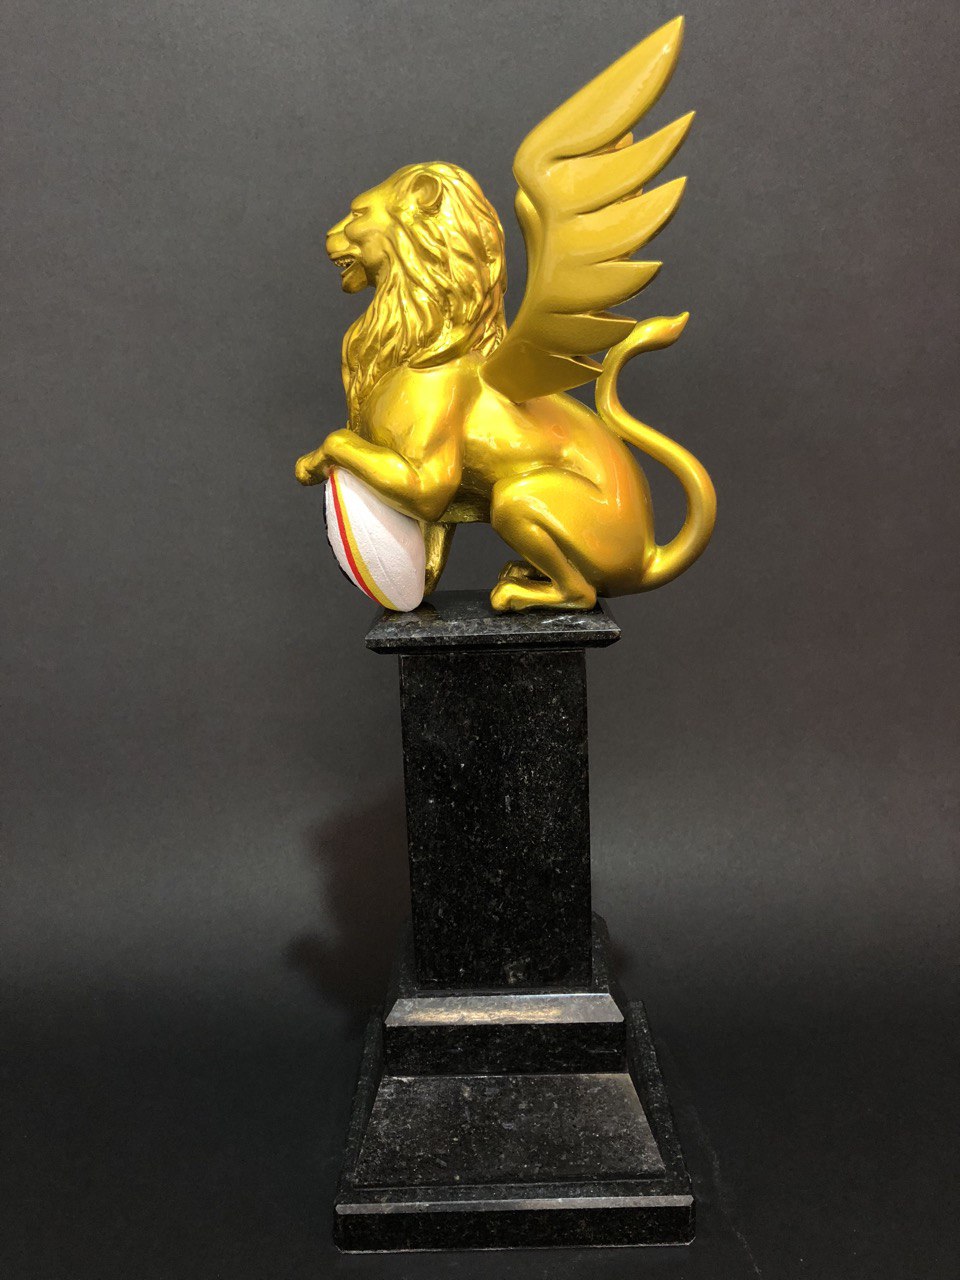 Lion award figurine for the Rugby Federation